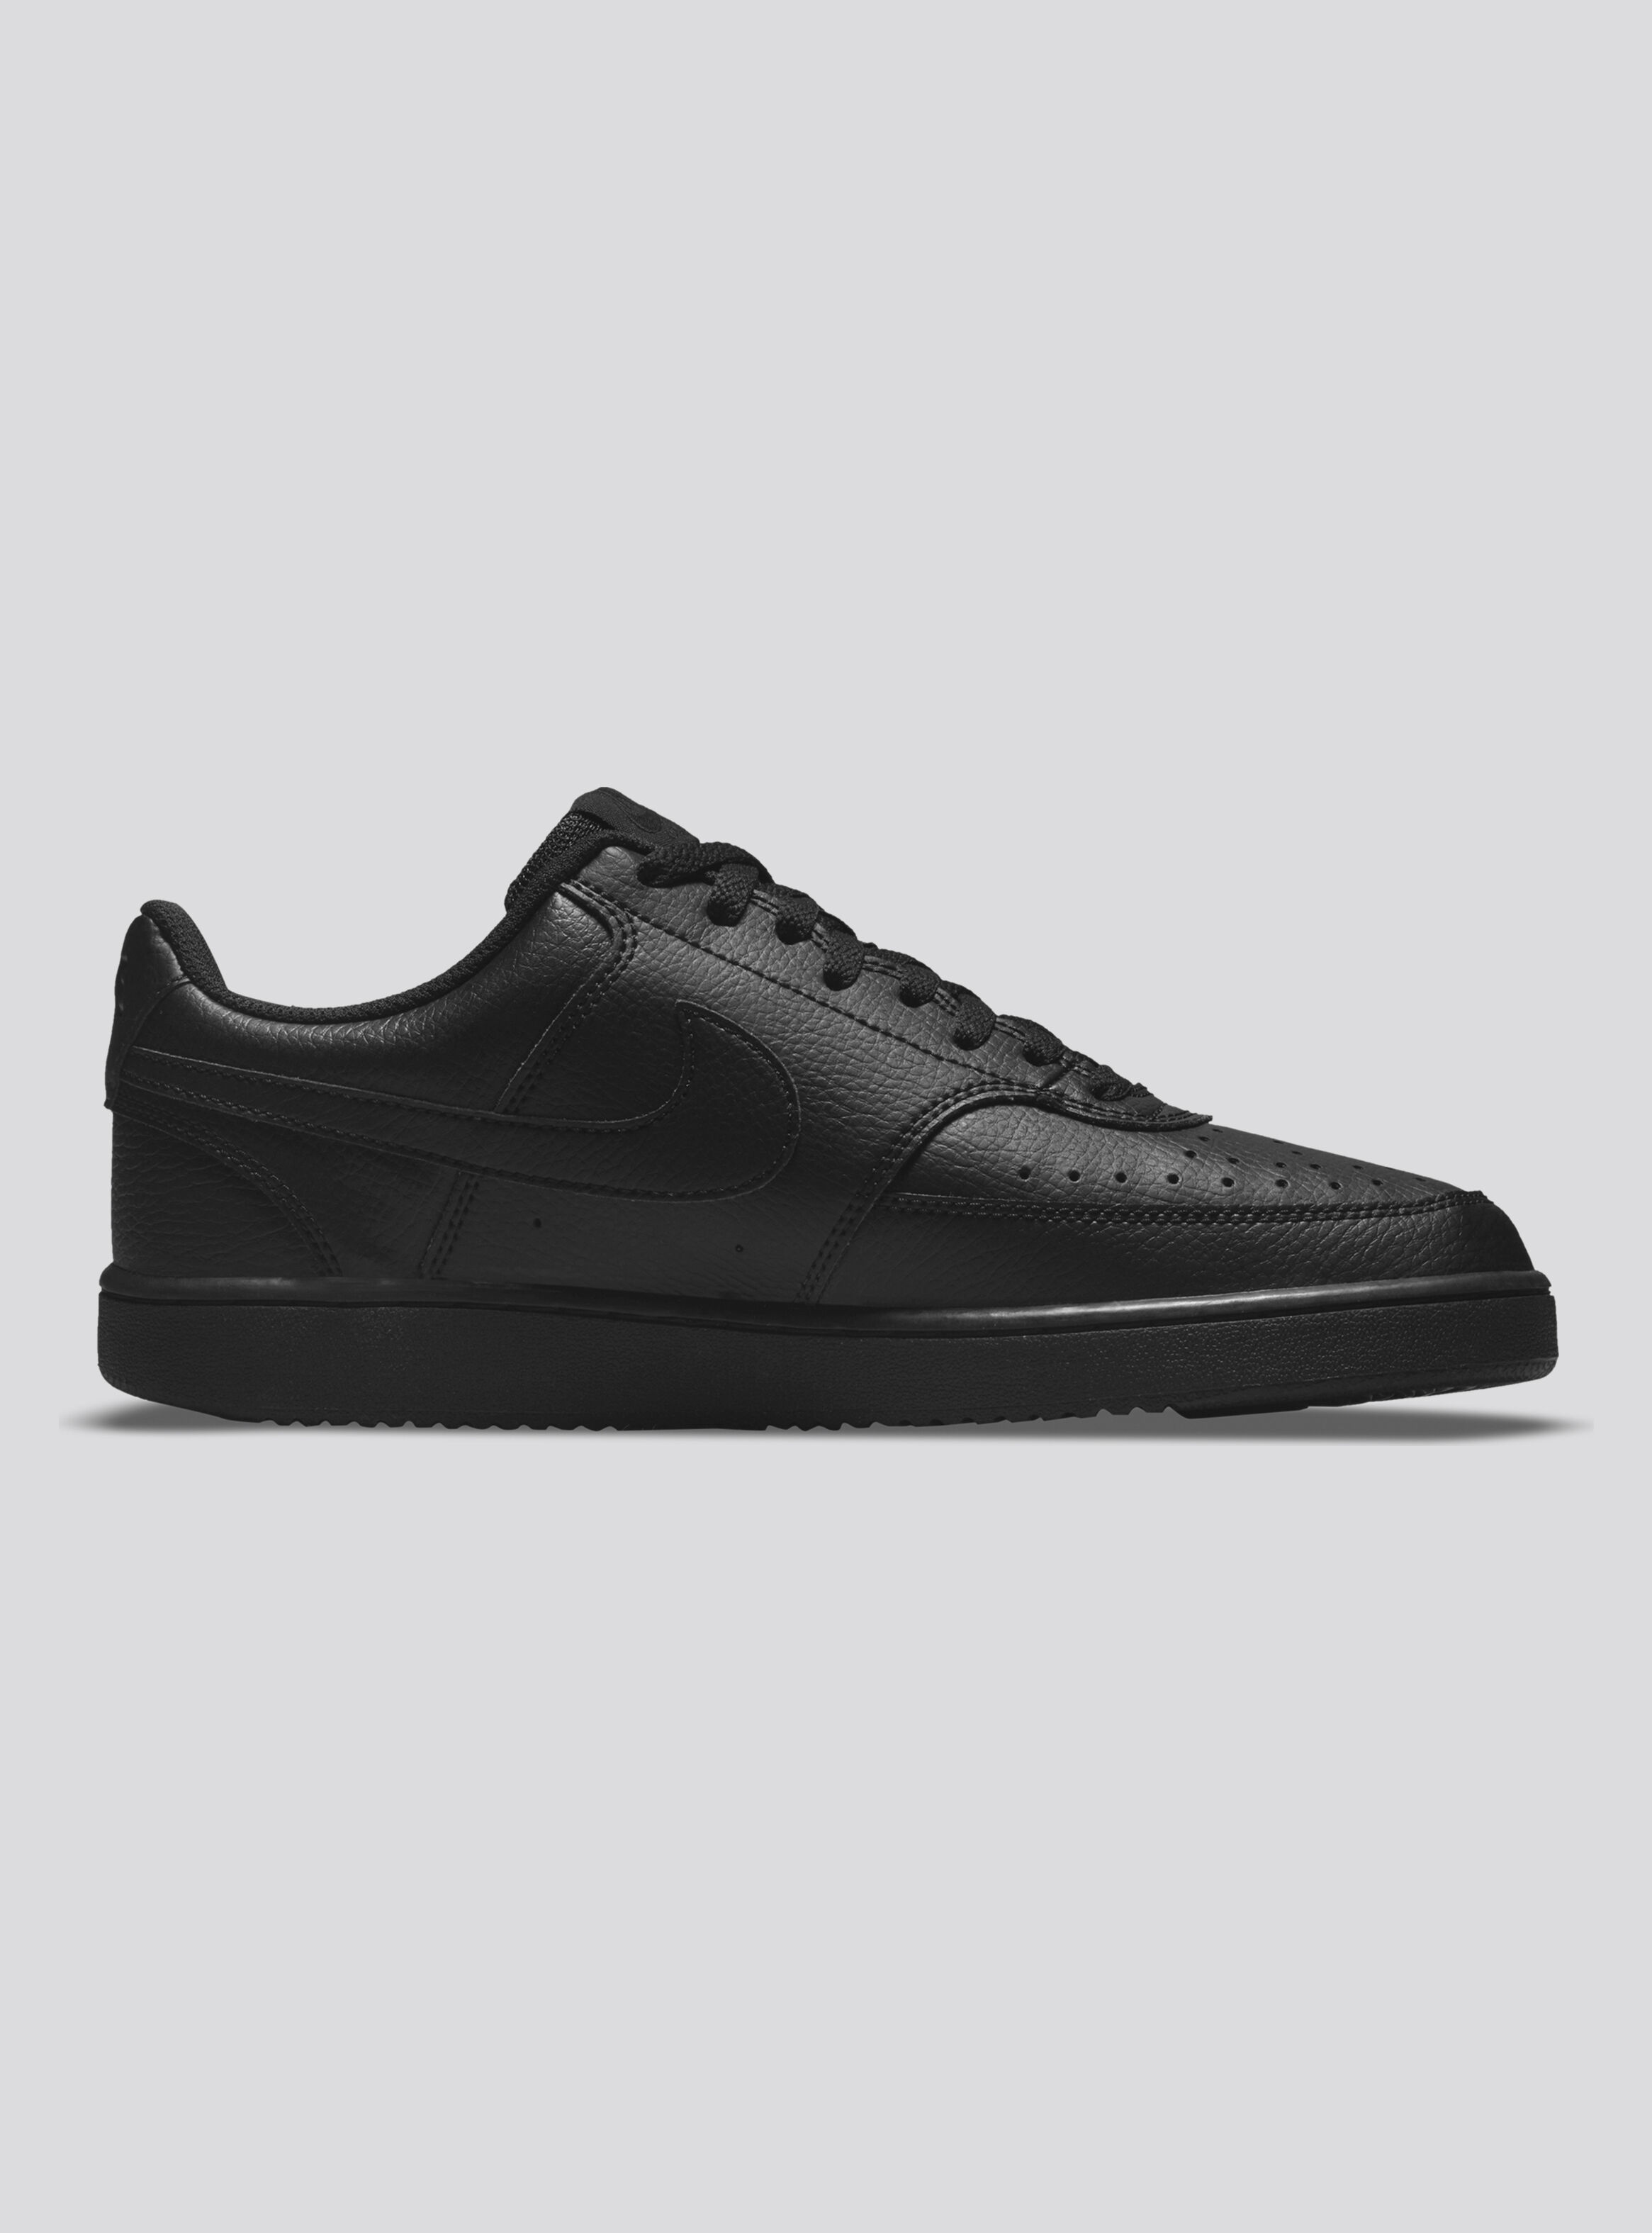 Court vision low next nature. Nike Court Vision Low мужские. Nike Court Vision Low Black. Nike Court Vision Low мужские черные. Nike Court Vision Low next nature мужские.